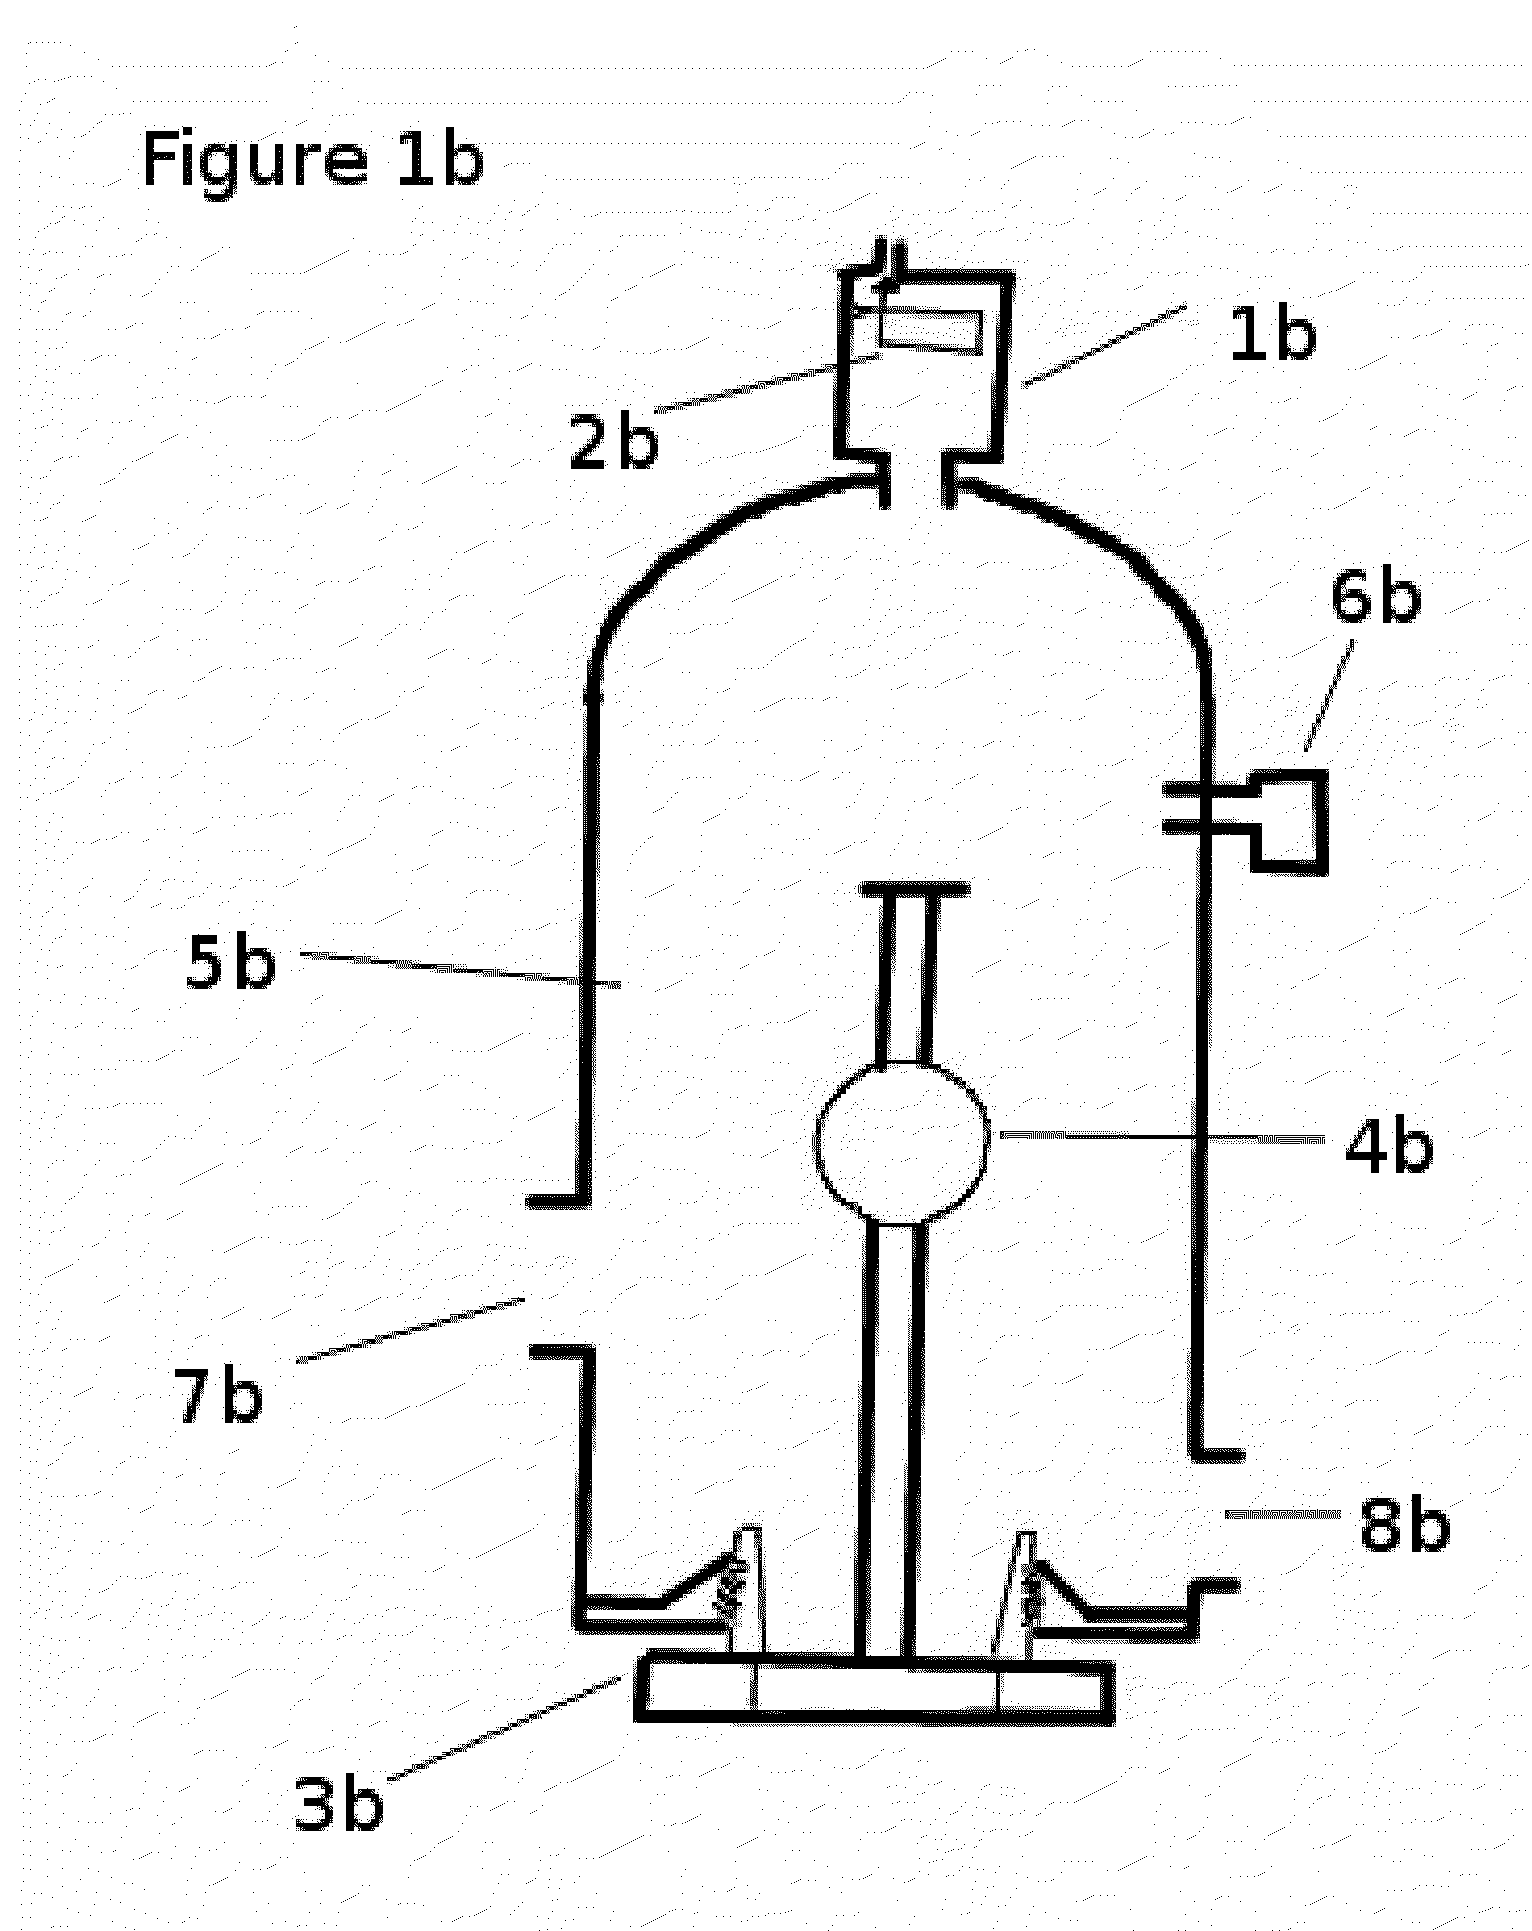 Apparatus and method of creating a concentrated supersaturated gaseous solution having ionization potential